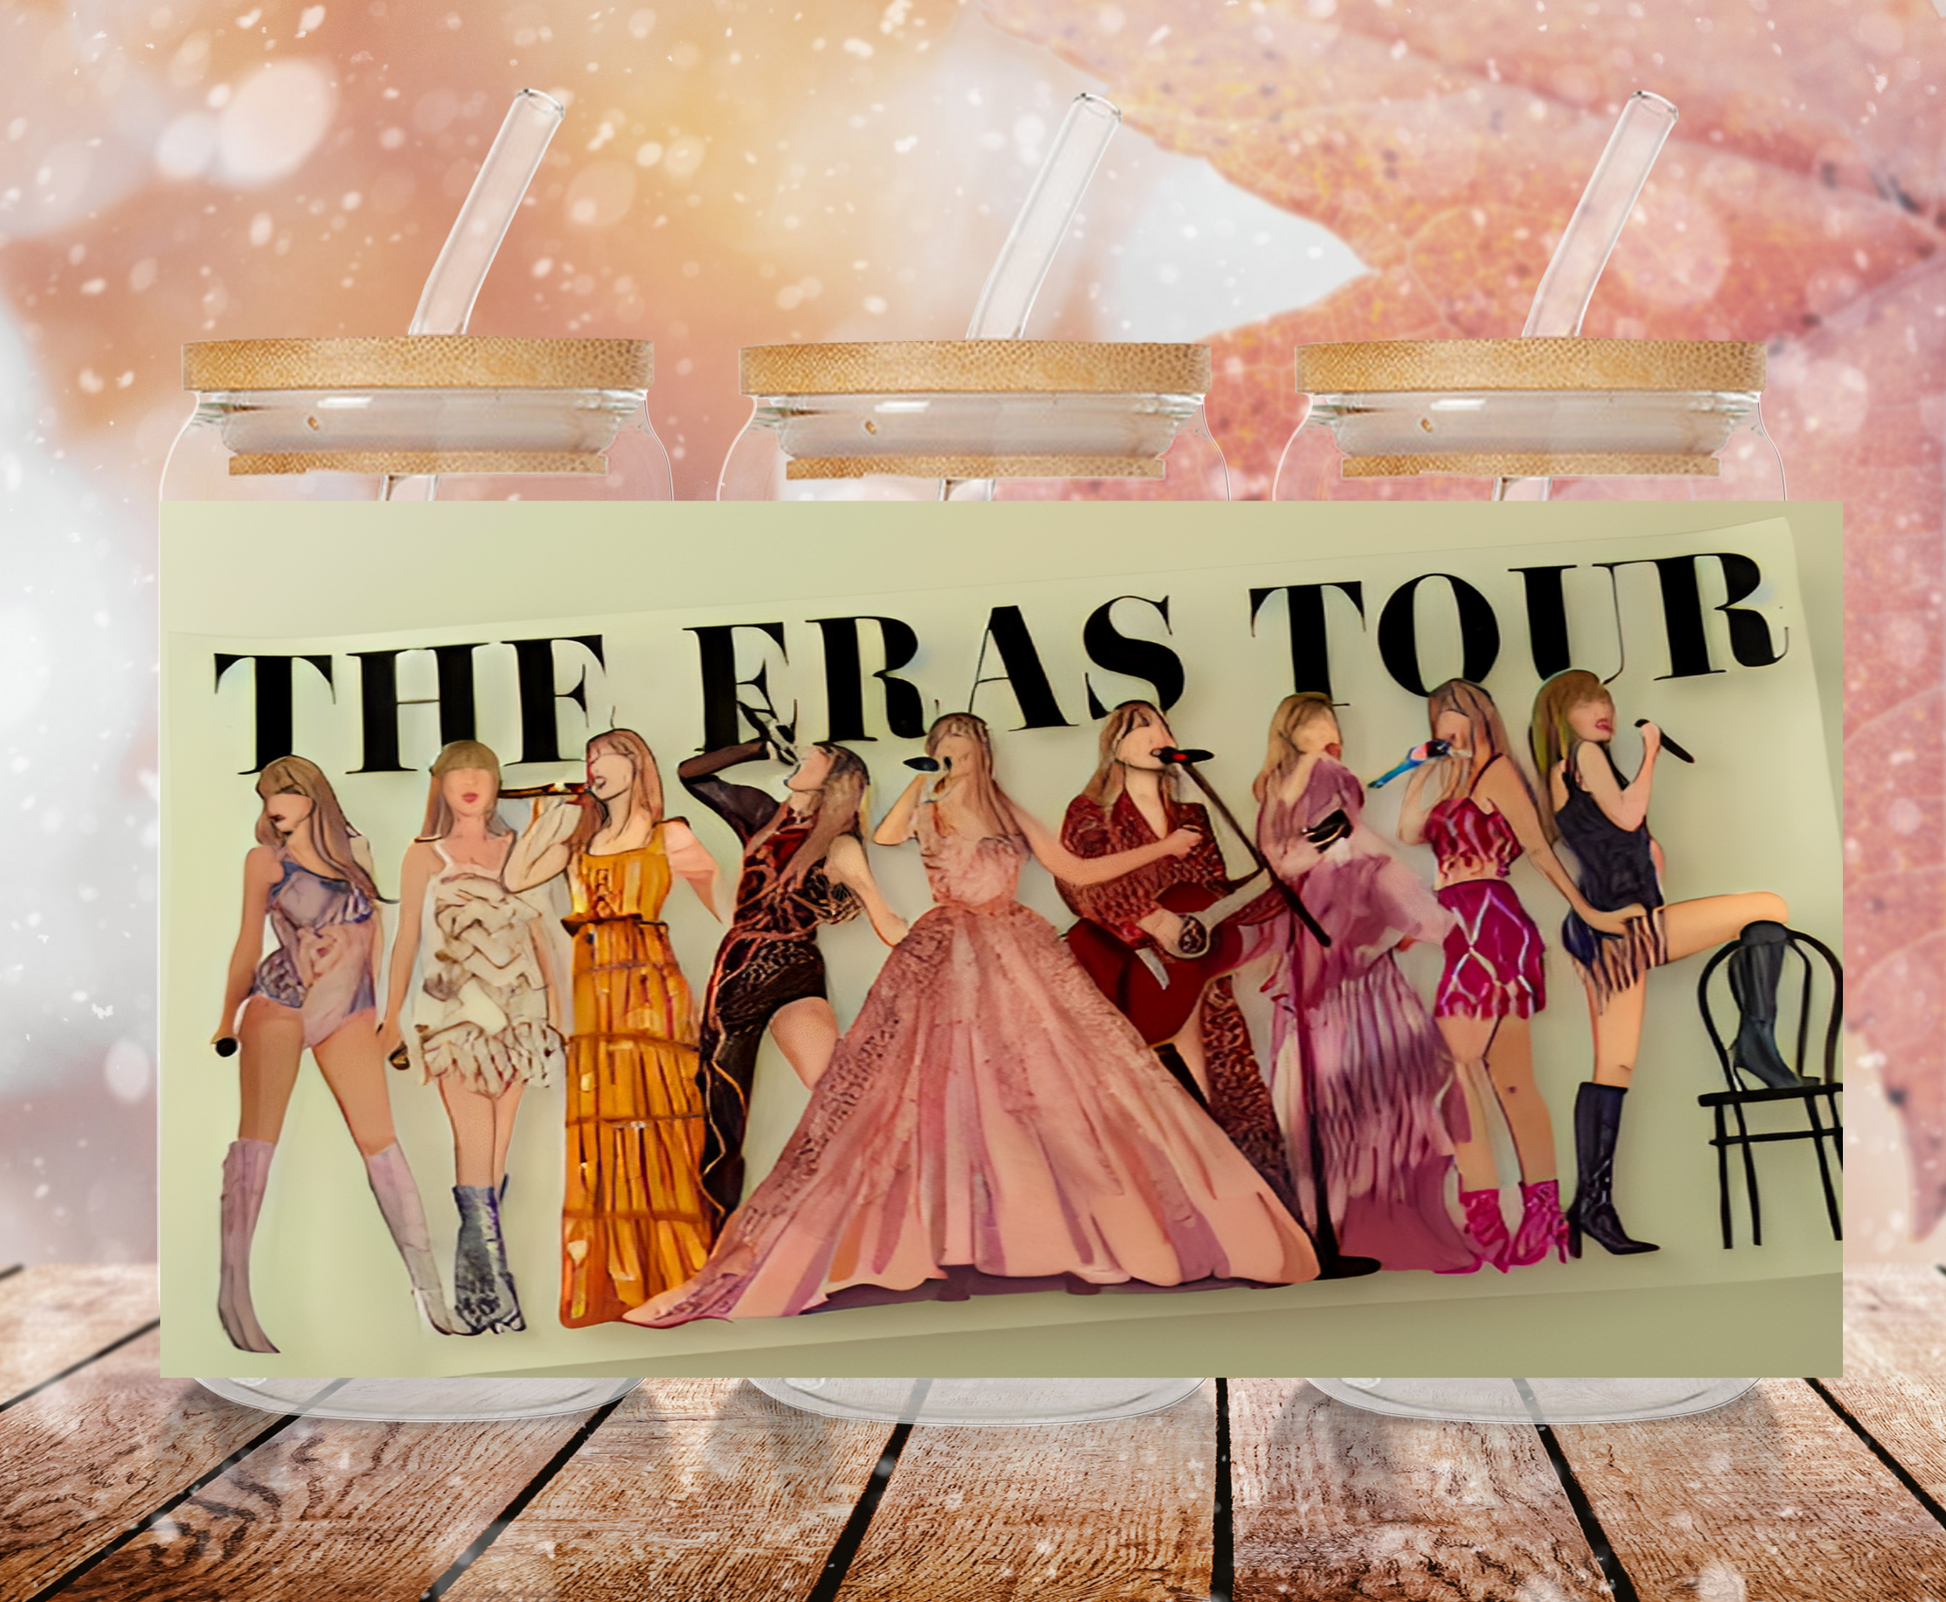 Swiftie Era Tour Fashion Change- 160z Clear or Frosted Libbey Glass Libbey/Beer Glass Lids 15 Daisy Designs & Creations LLC